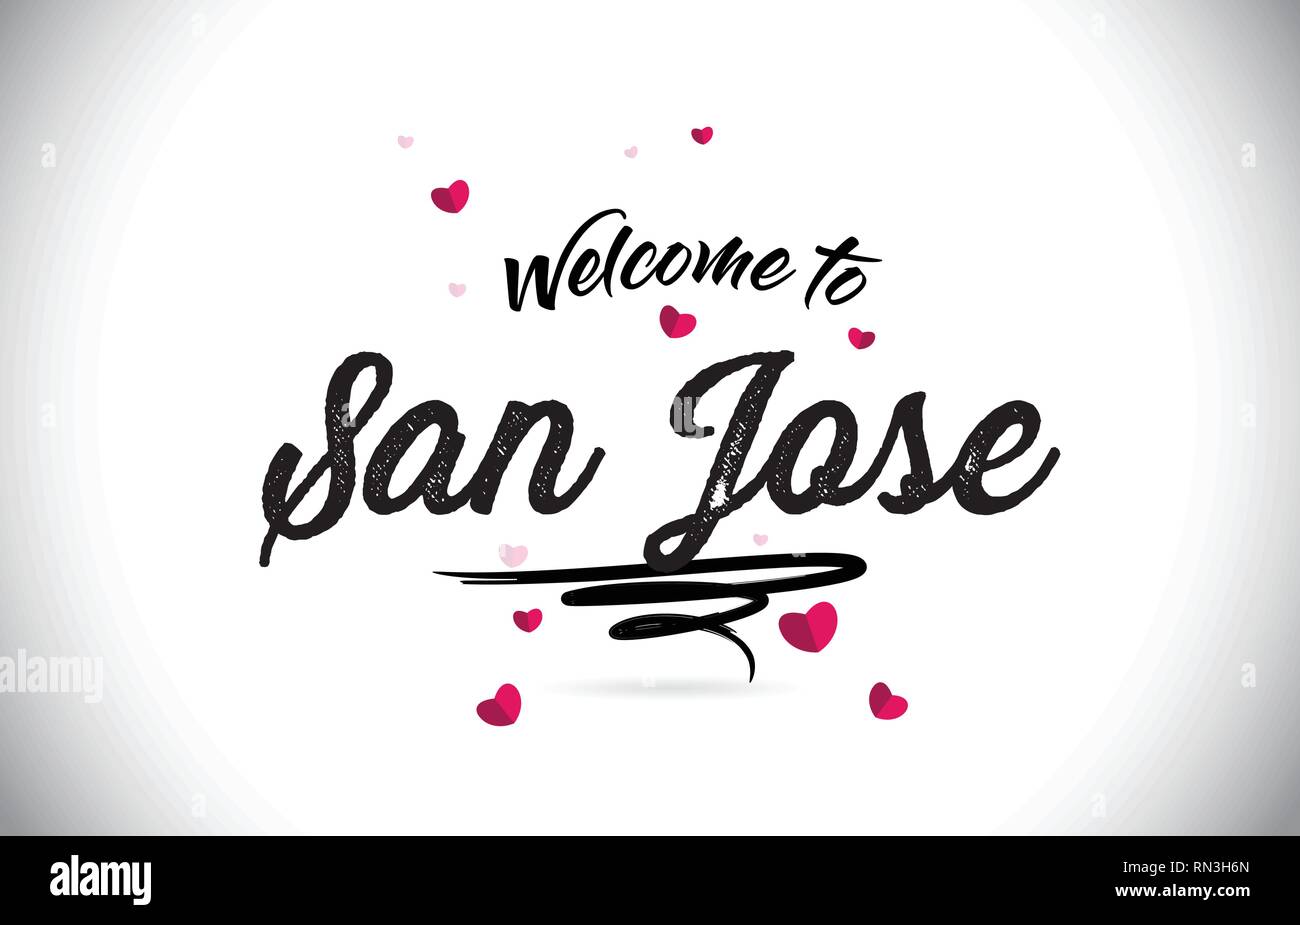 San Jose Welcome To Word Text with Handwritten Font and Pink Heart Shape Design Vector Illustration. Stock Vector